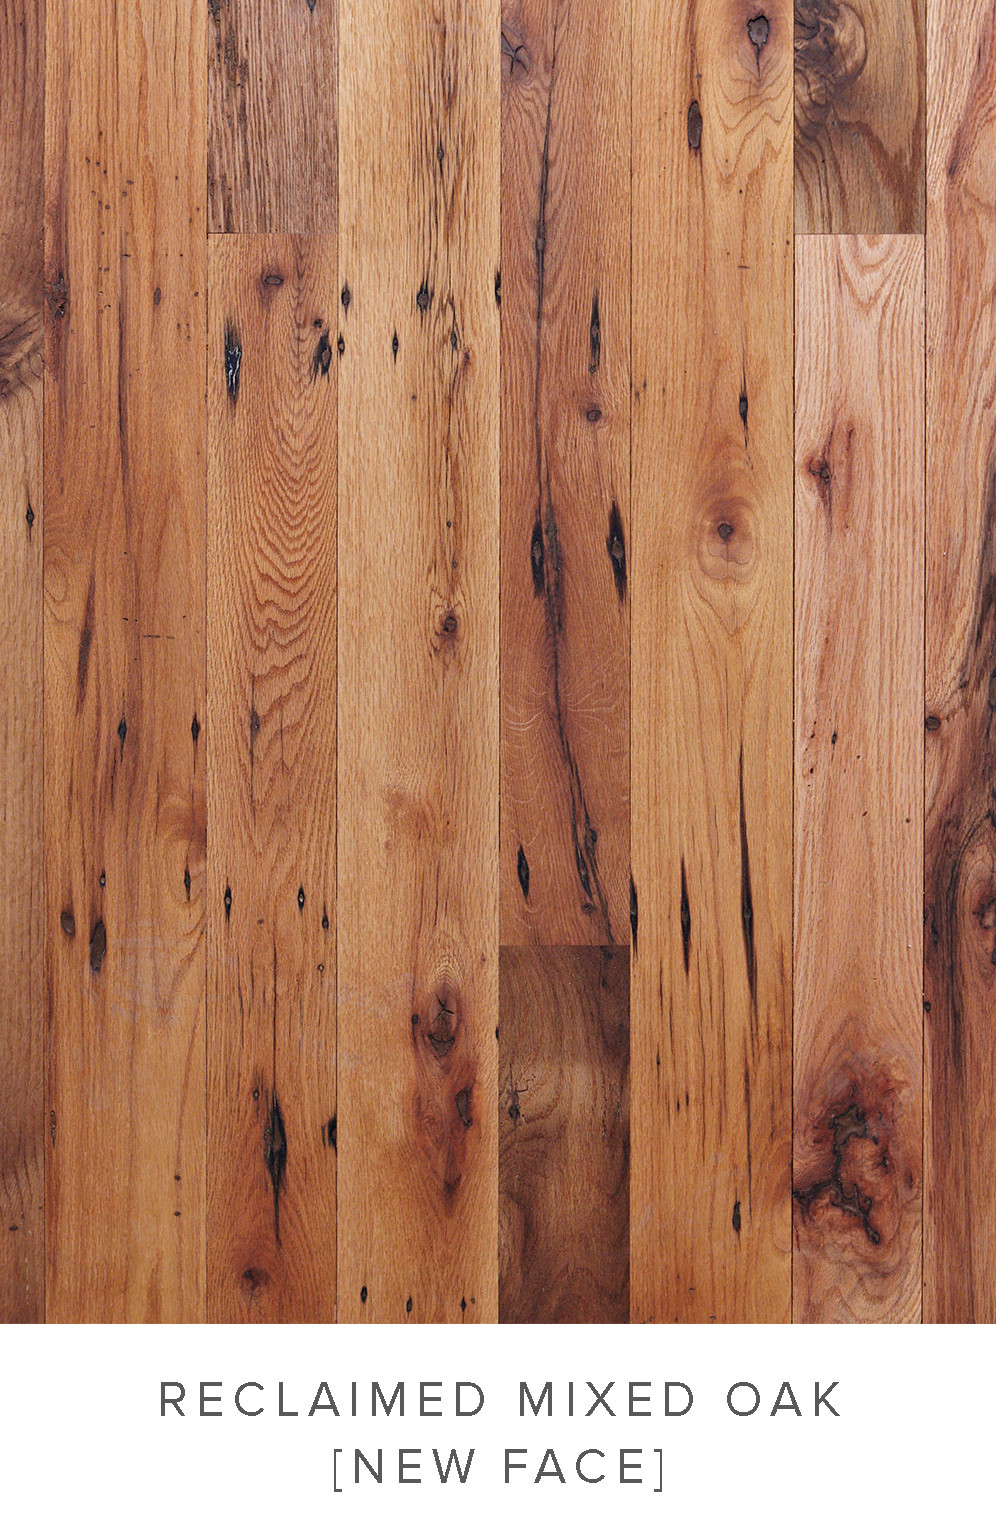 12 Wonderful Walnut Oak Hardwood Flooring 2024 free download walnut oak hardwood flooring of extensive range of reclaimed wood flooring all under one roof at the with regard to reclaimed mixed oak new face